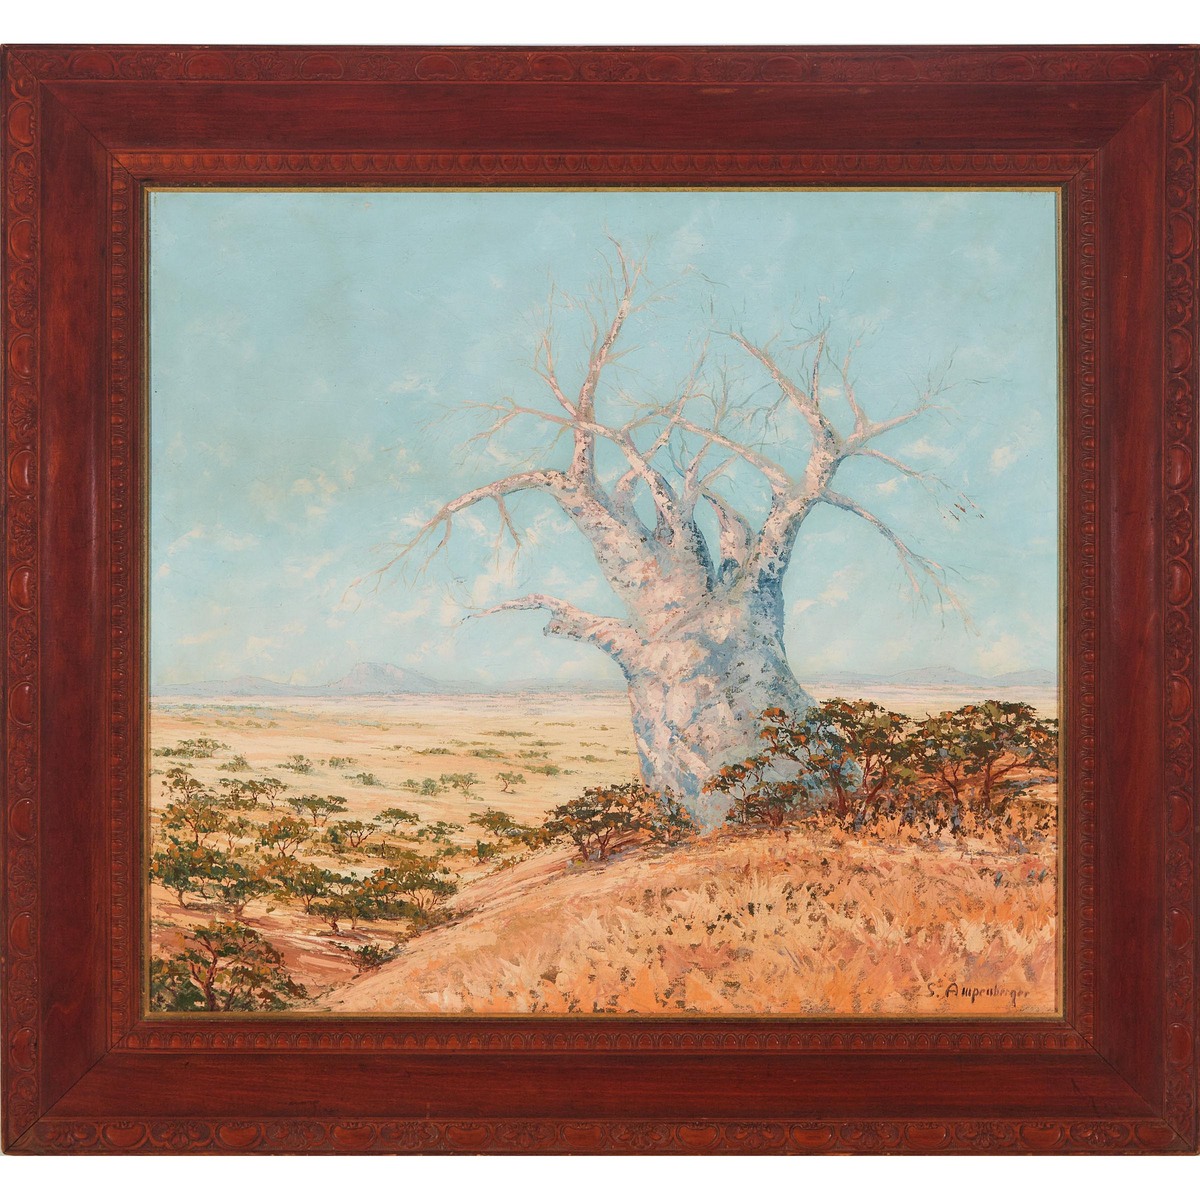 Stefan Ampenberger (1908-1983), THE BAOBAB TREE, signed lower right, 29.7 x 32.4 in — 75.4 x 82.2 cm - Image 2 of 4